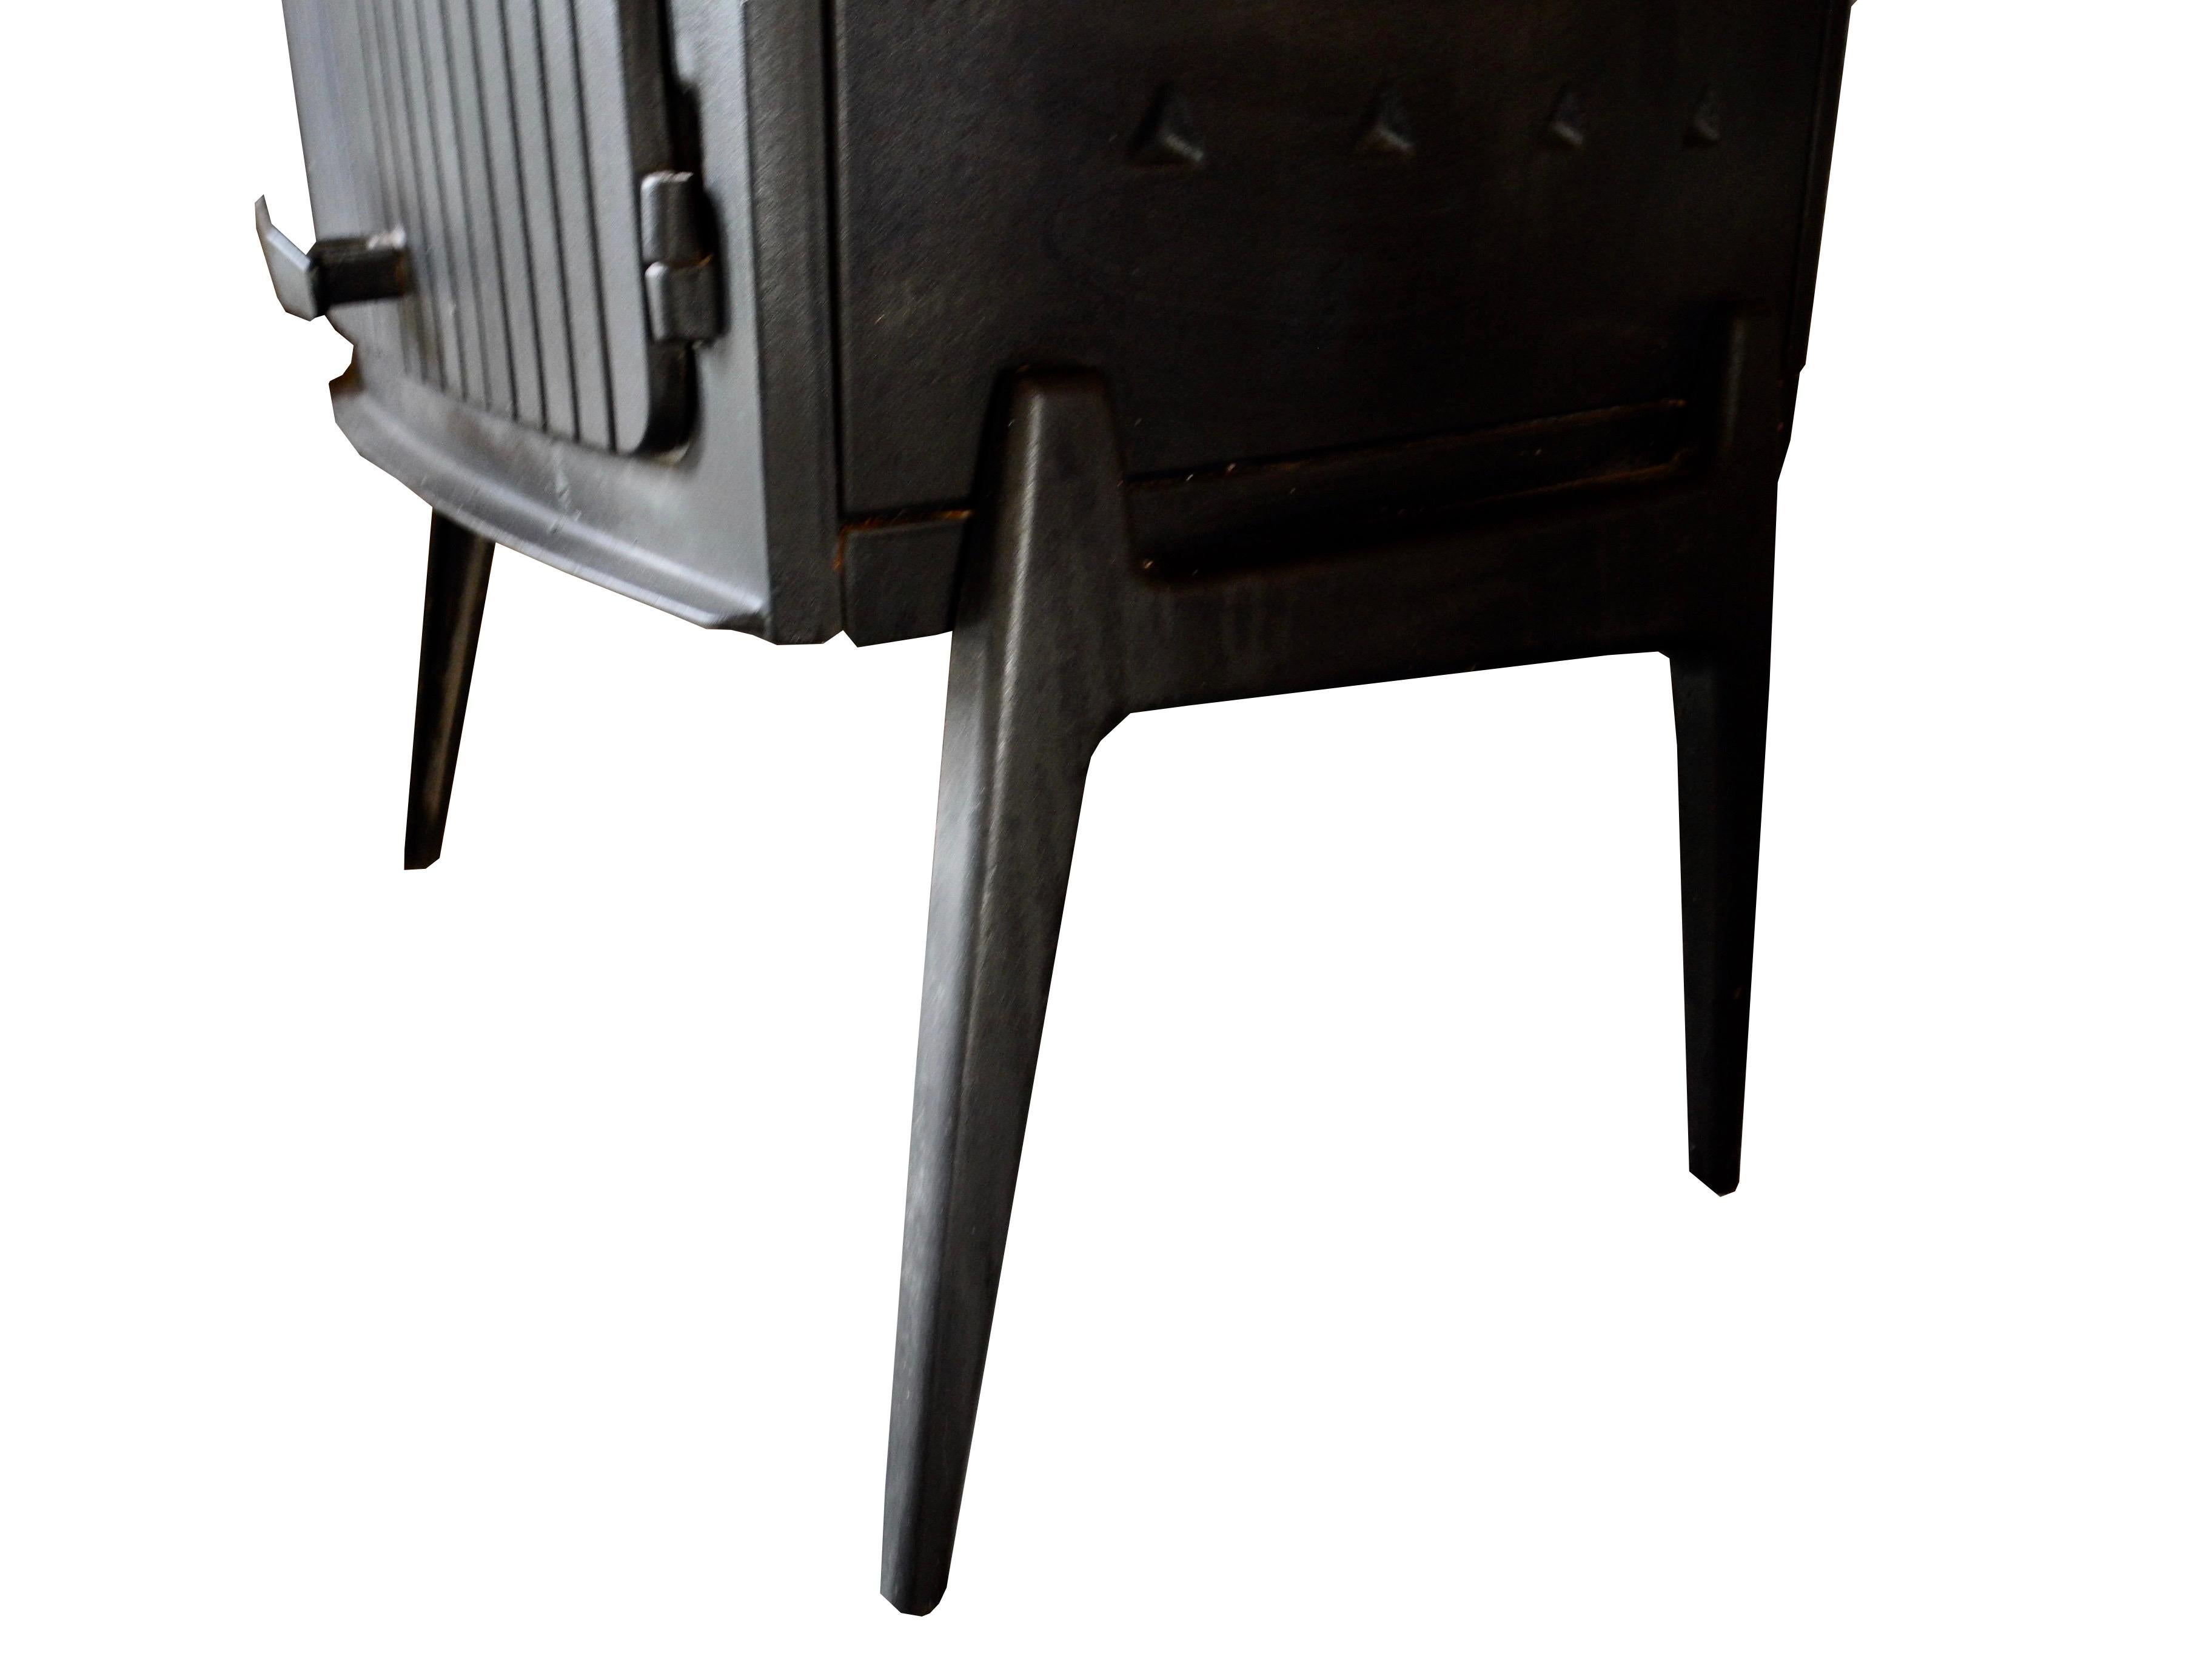 20th Century Vintage Modern Danish Black Cast Iron Wood Stove and Fireplace by Morsø, Denmark